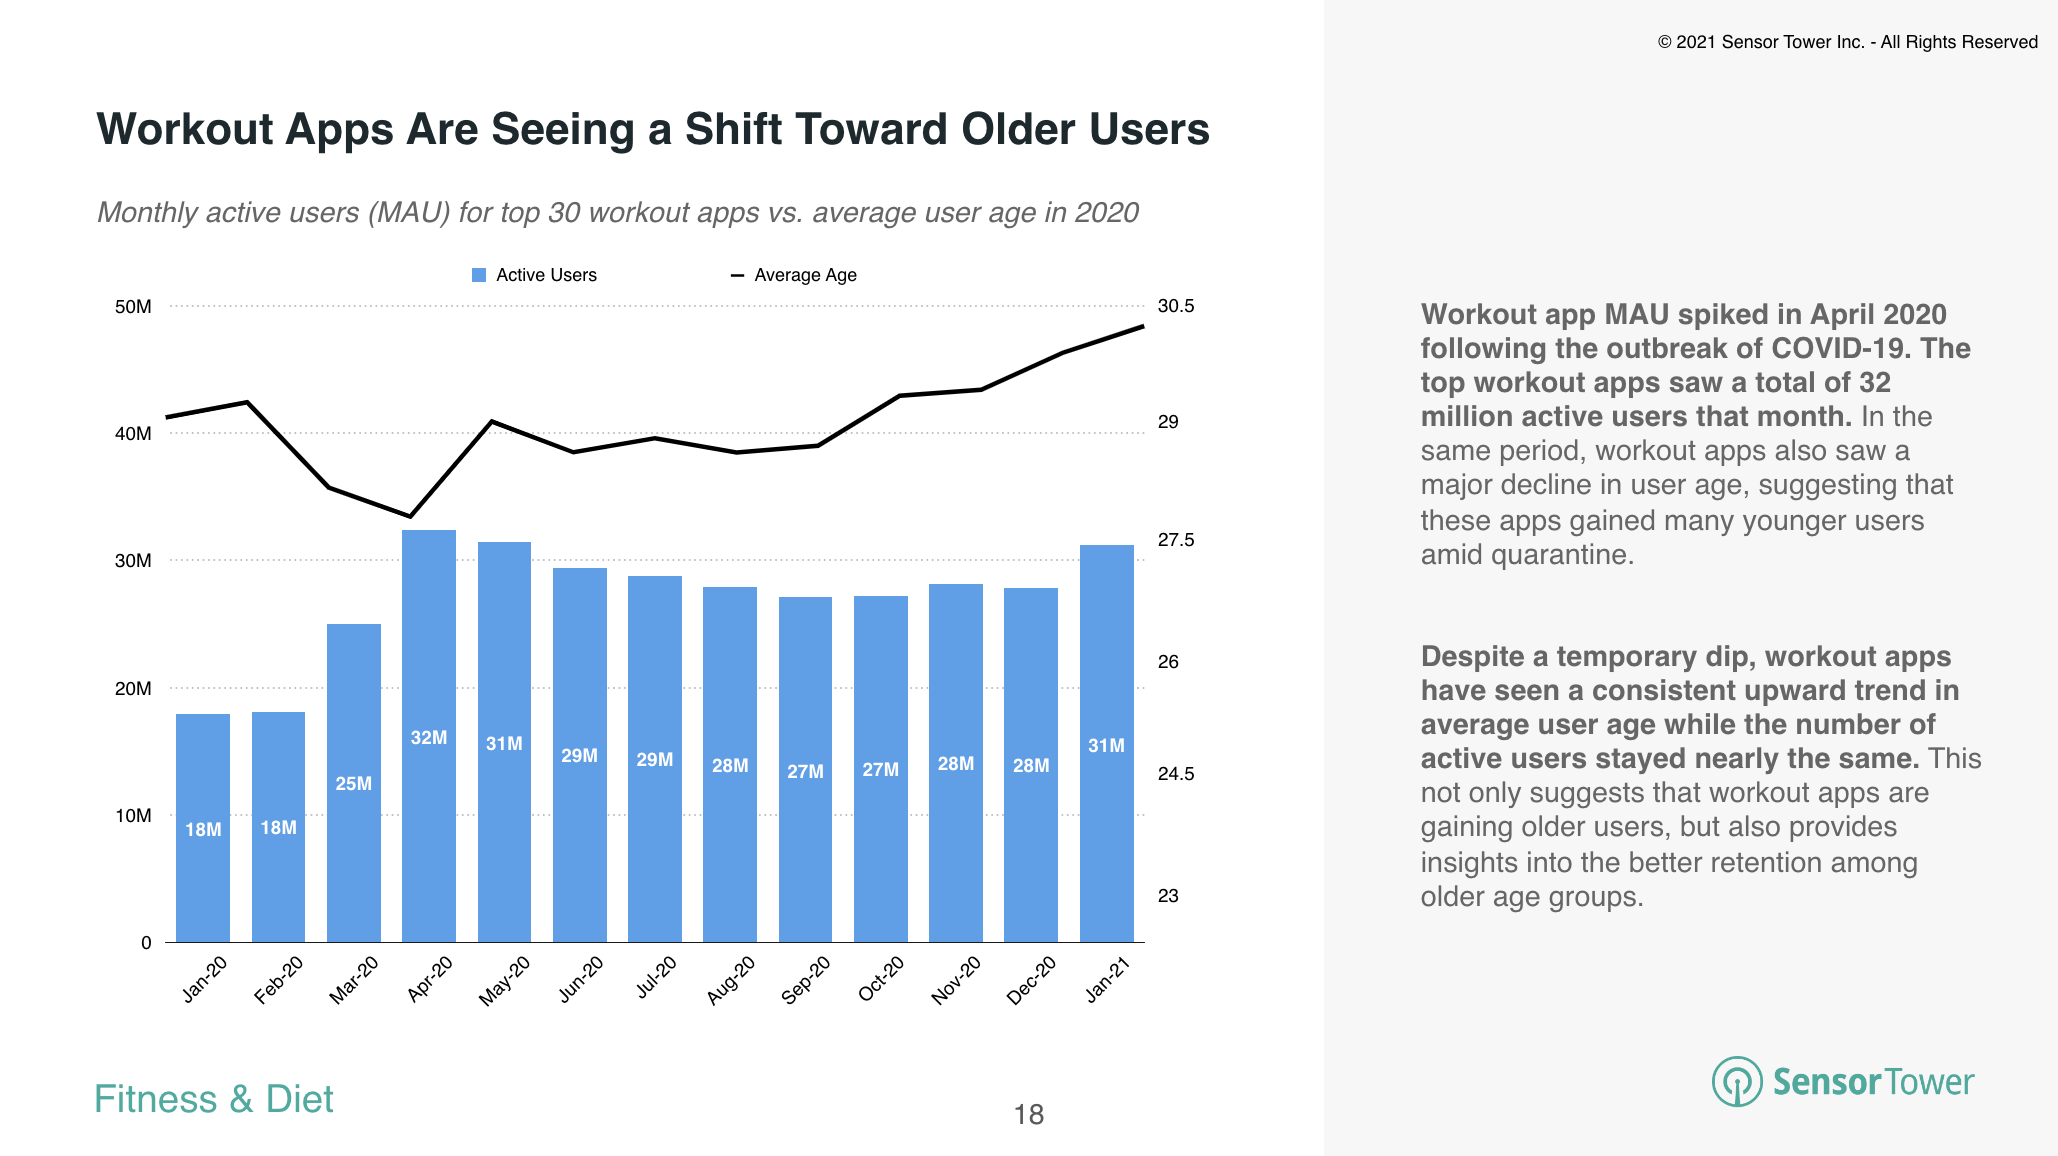 The top workout apps in the U.S. are seeing increased adoption among older users